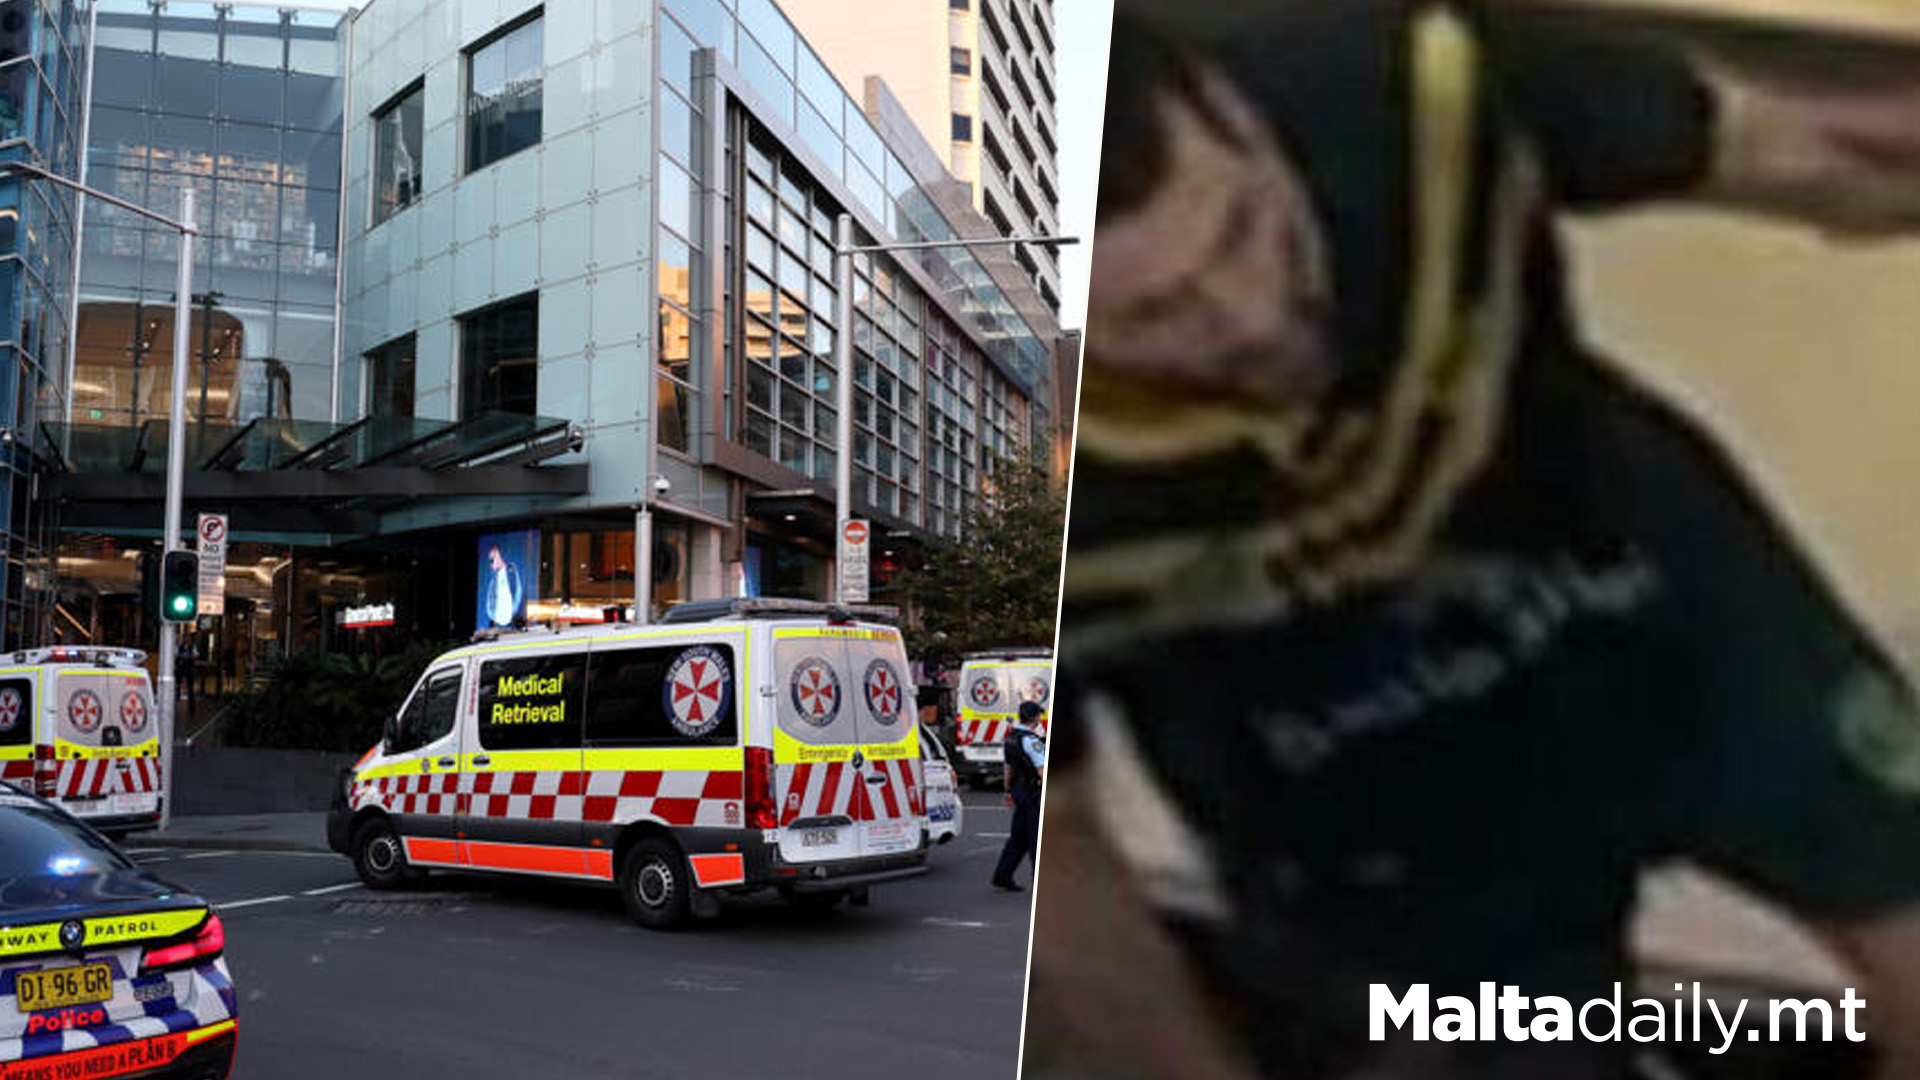 5 Dead & Others Injured In Sydney Mall Knife Attack